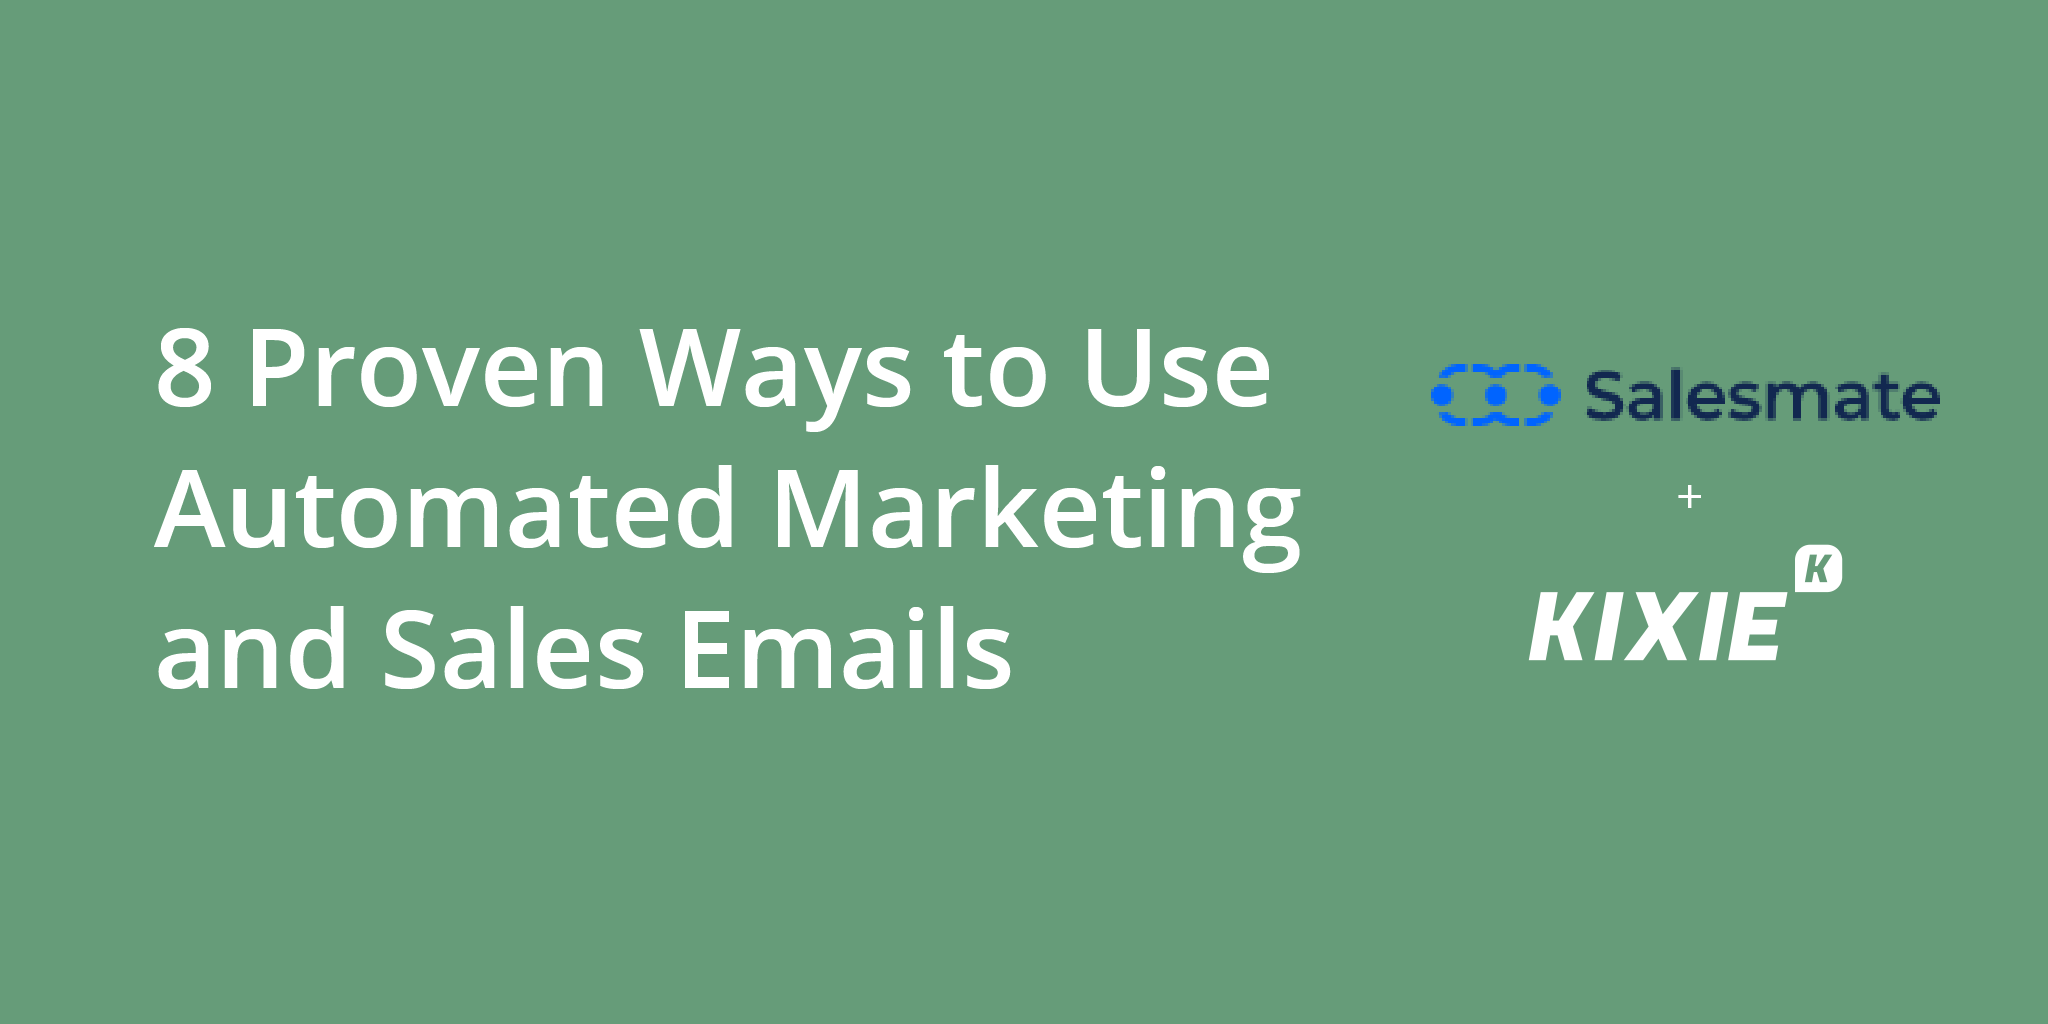 8 Proven Ways to Use Automated Marketing and Sales Emails | Telephones for business